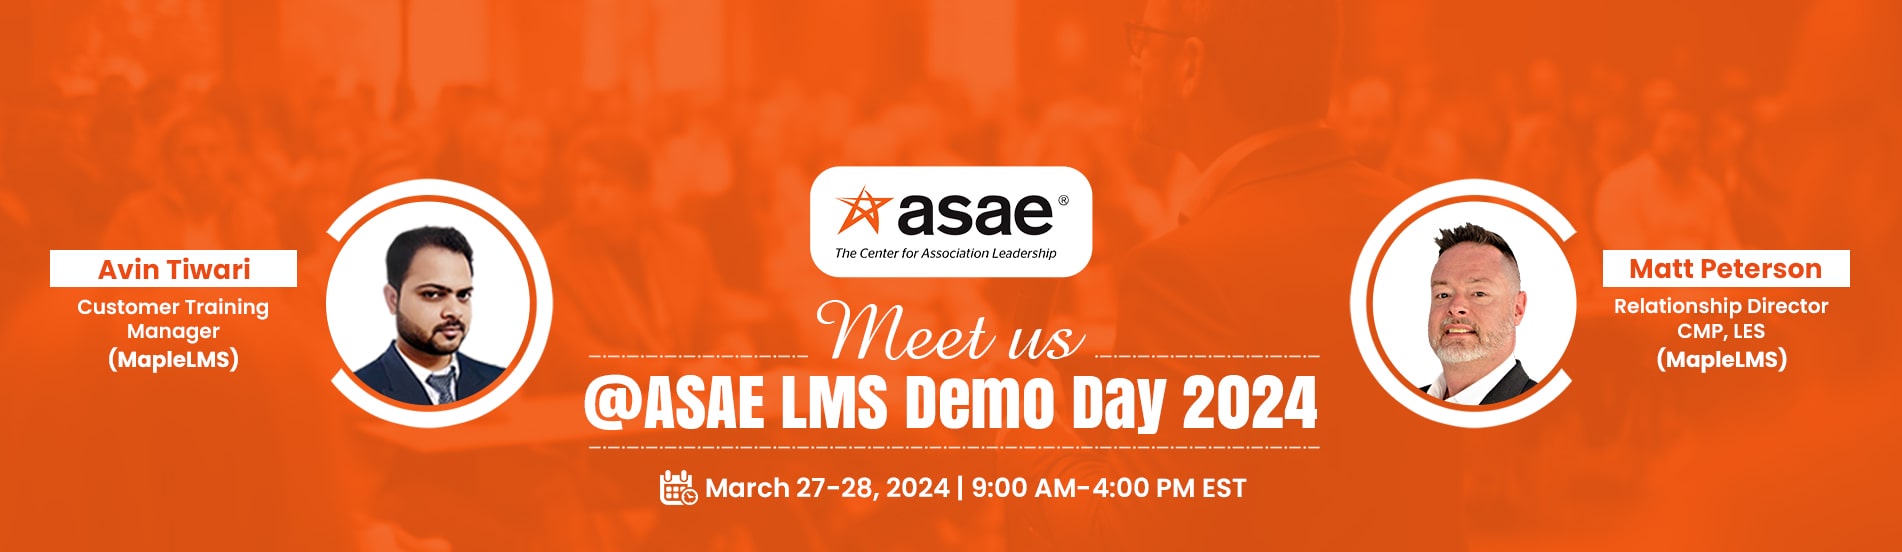 MapleLMS is Presenting at ASAE LMS Demo Day | March 27 - 28, 2024